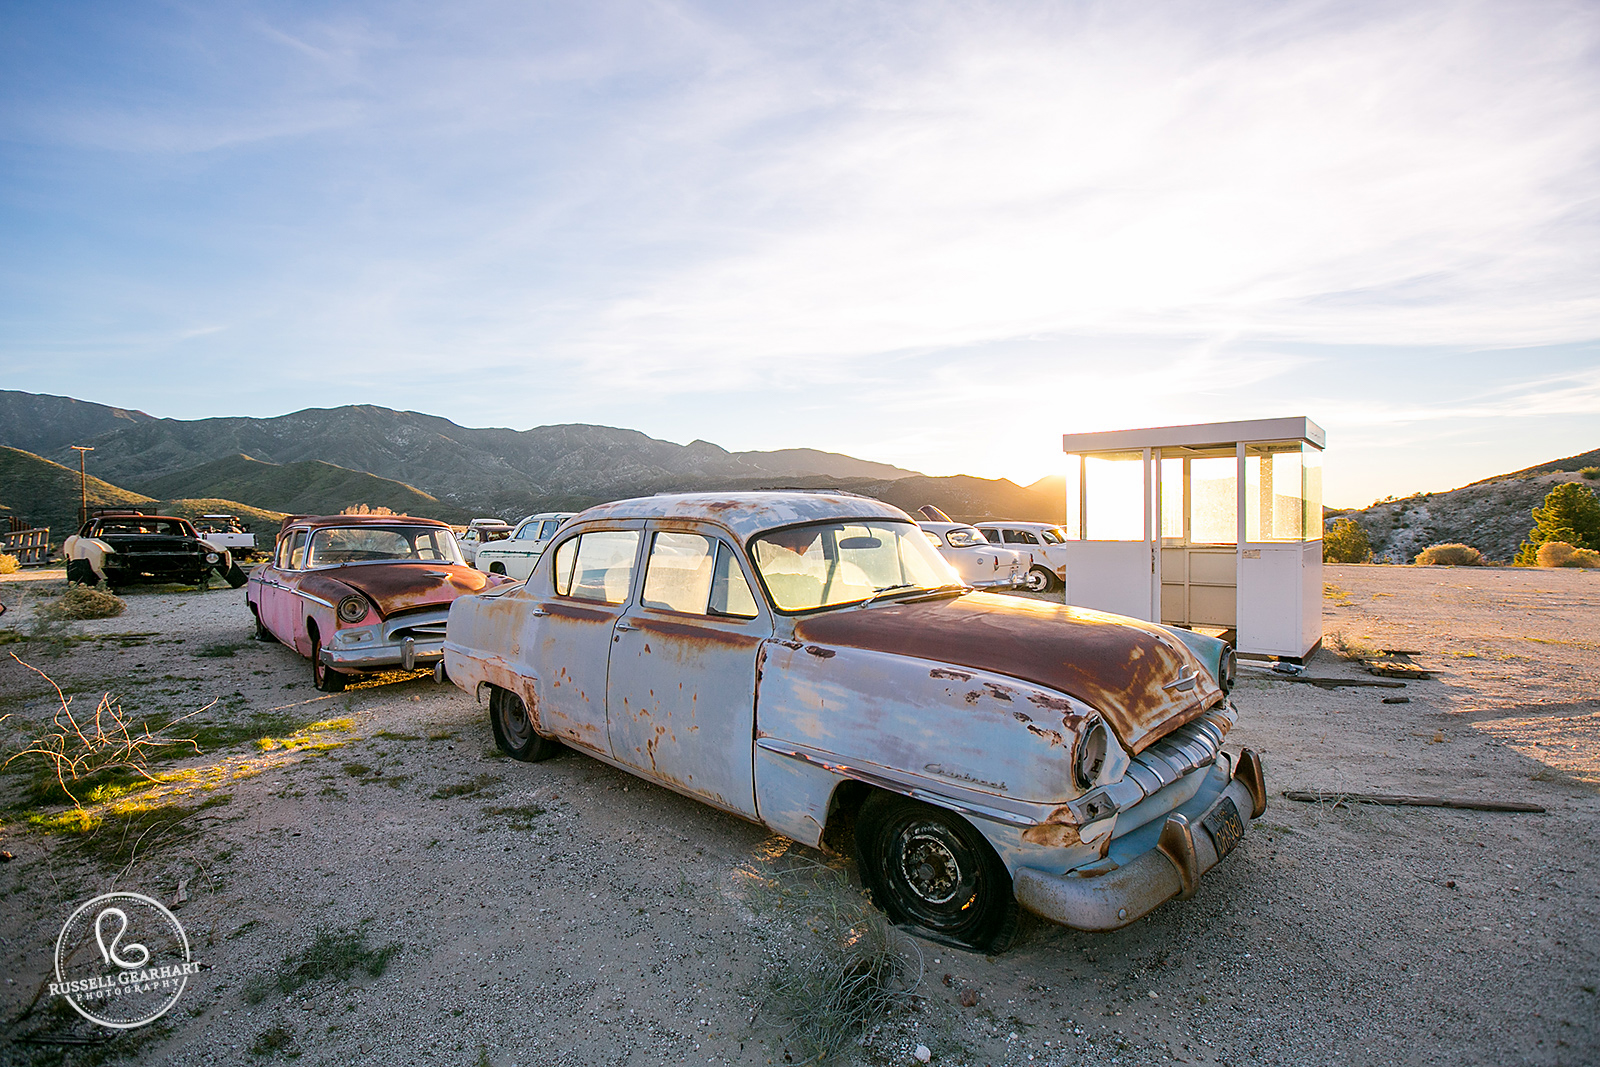 Old Car Graveyard – Rustic Southern California Wedding Location – Russell Gearhart Photography – www.gearhartphoto.com